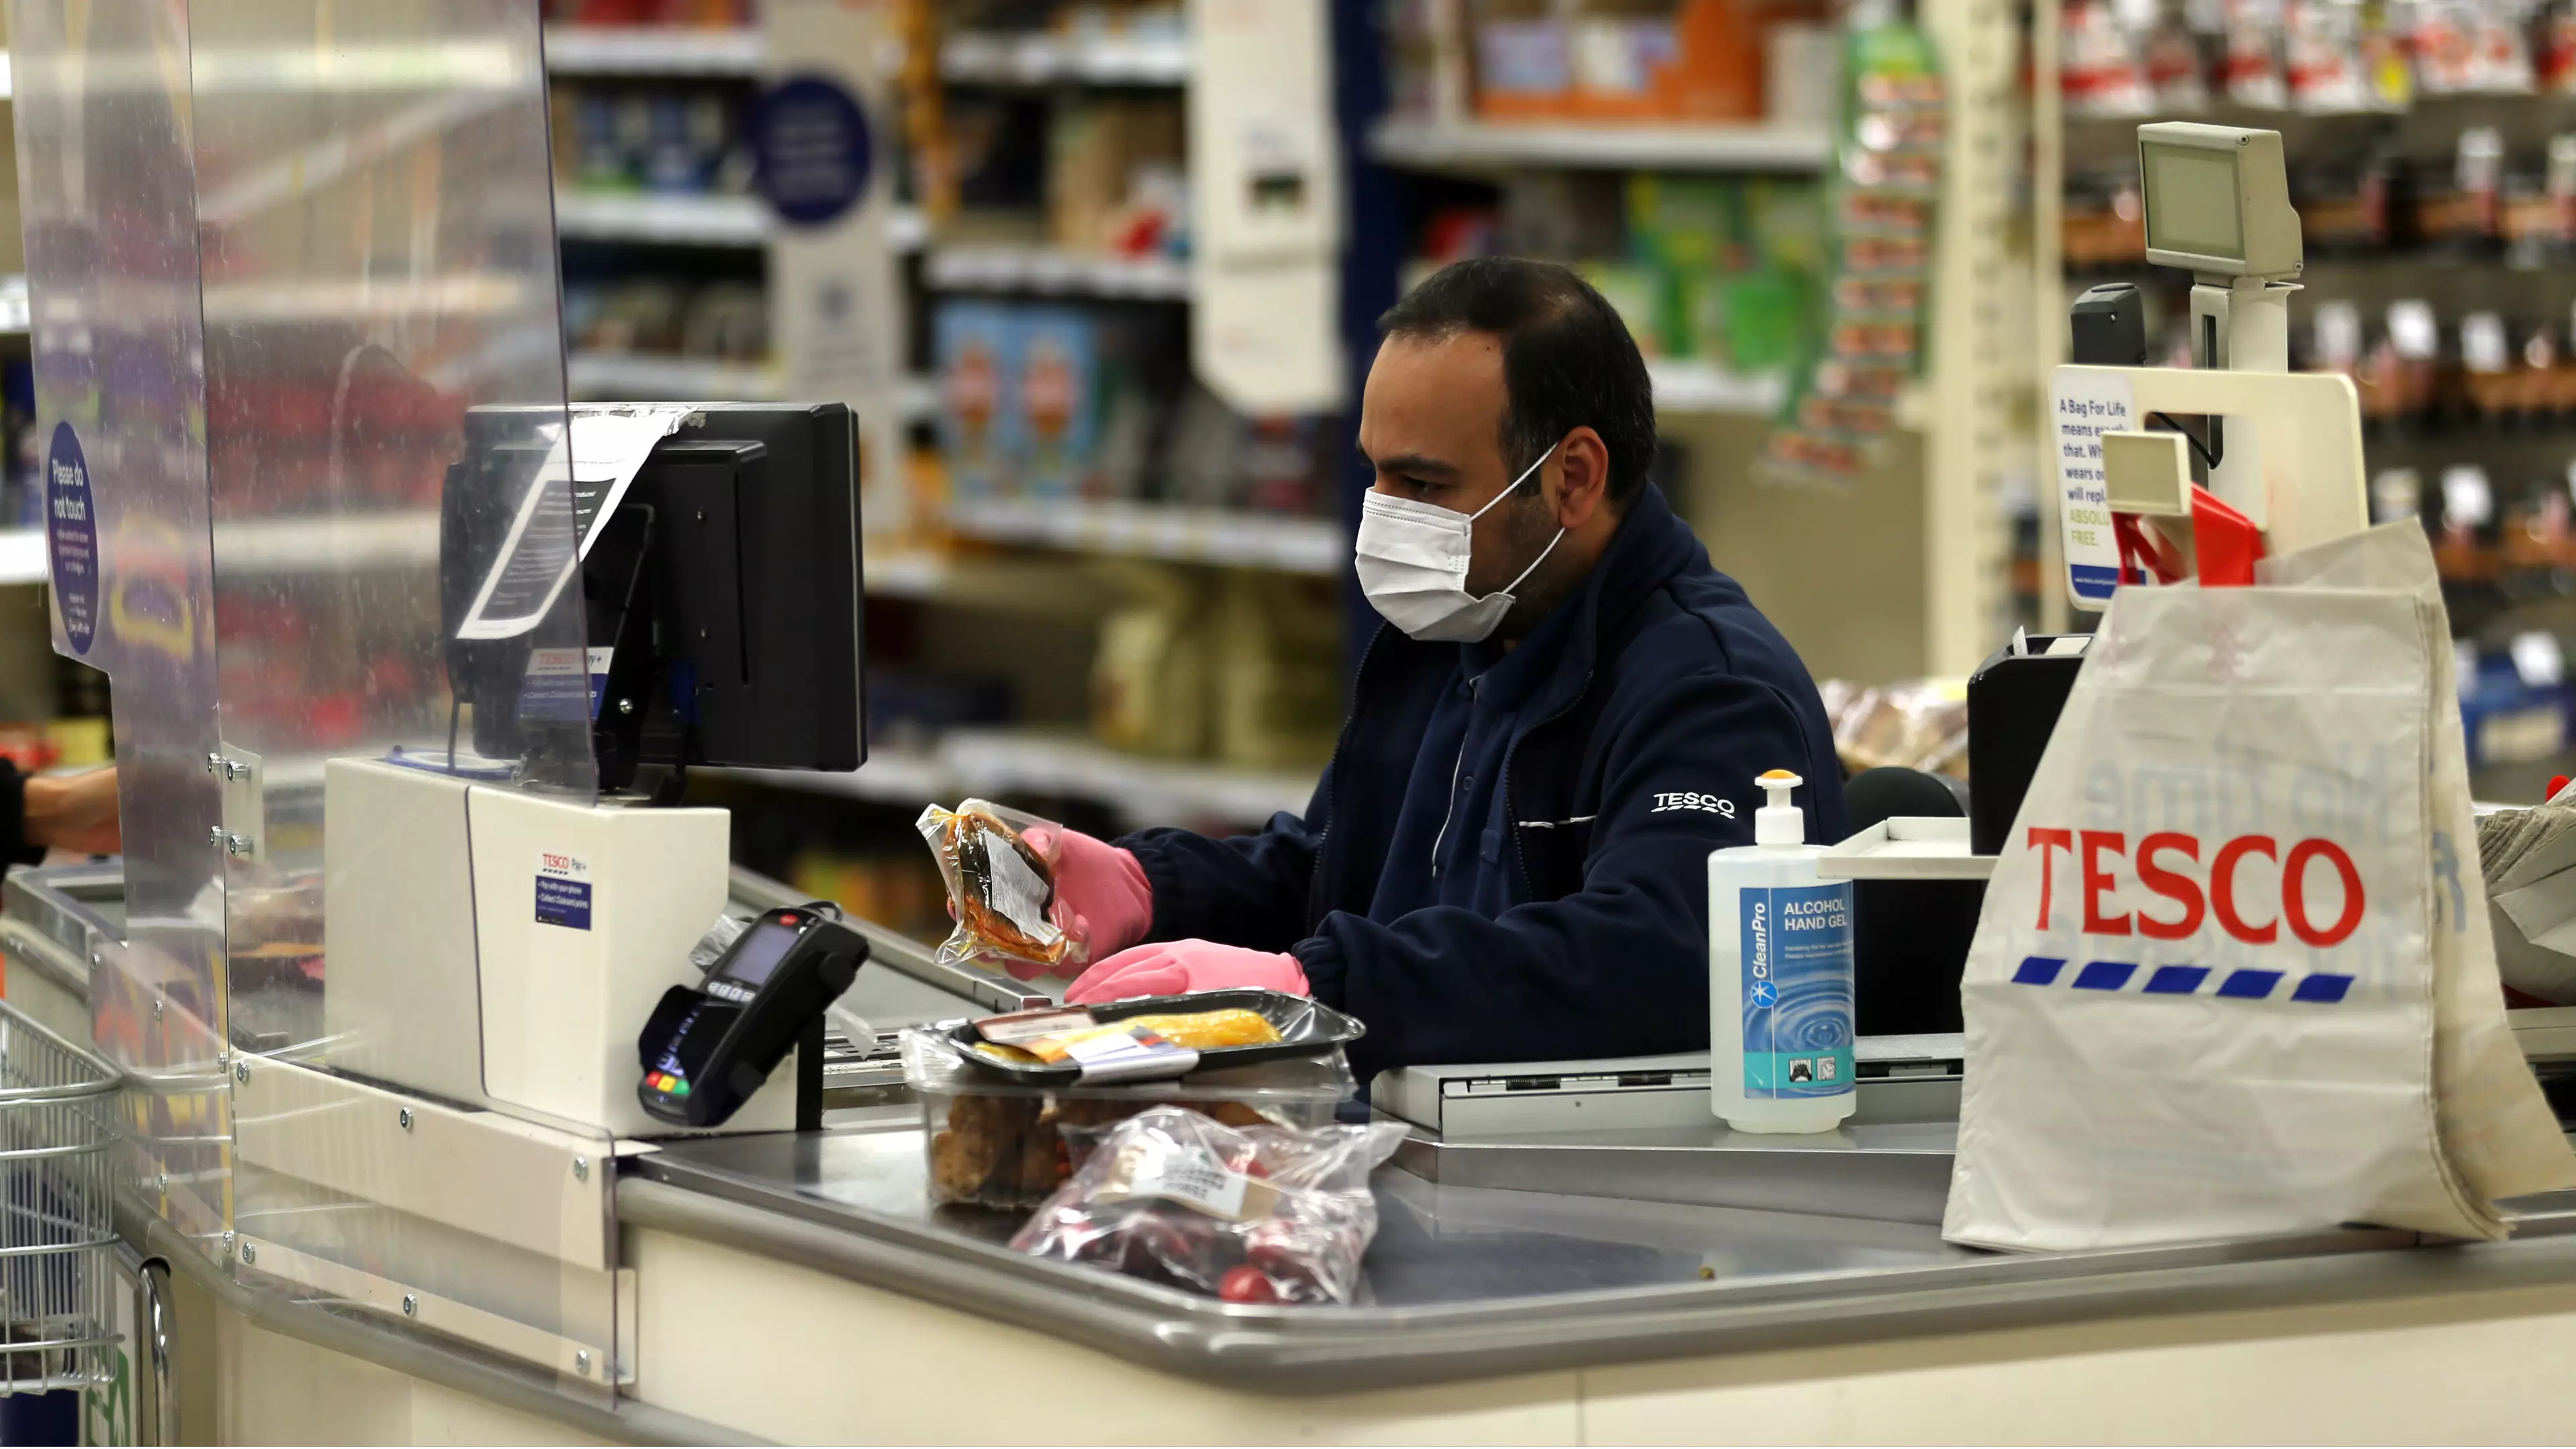 75% Of People Agree With £100 Fine For Those Who Don't Wear Face Masks In Stores